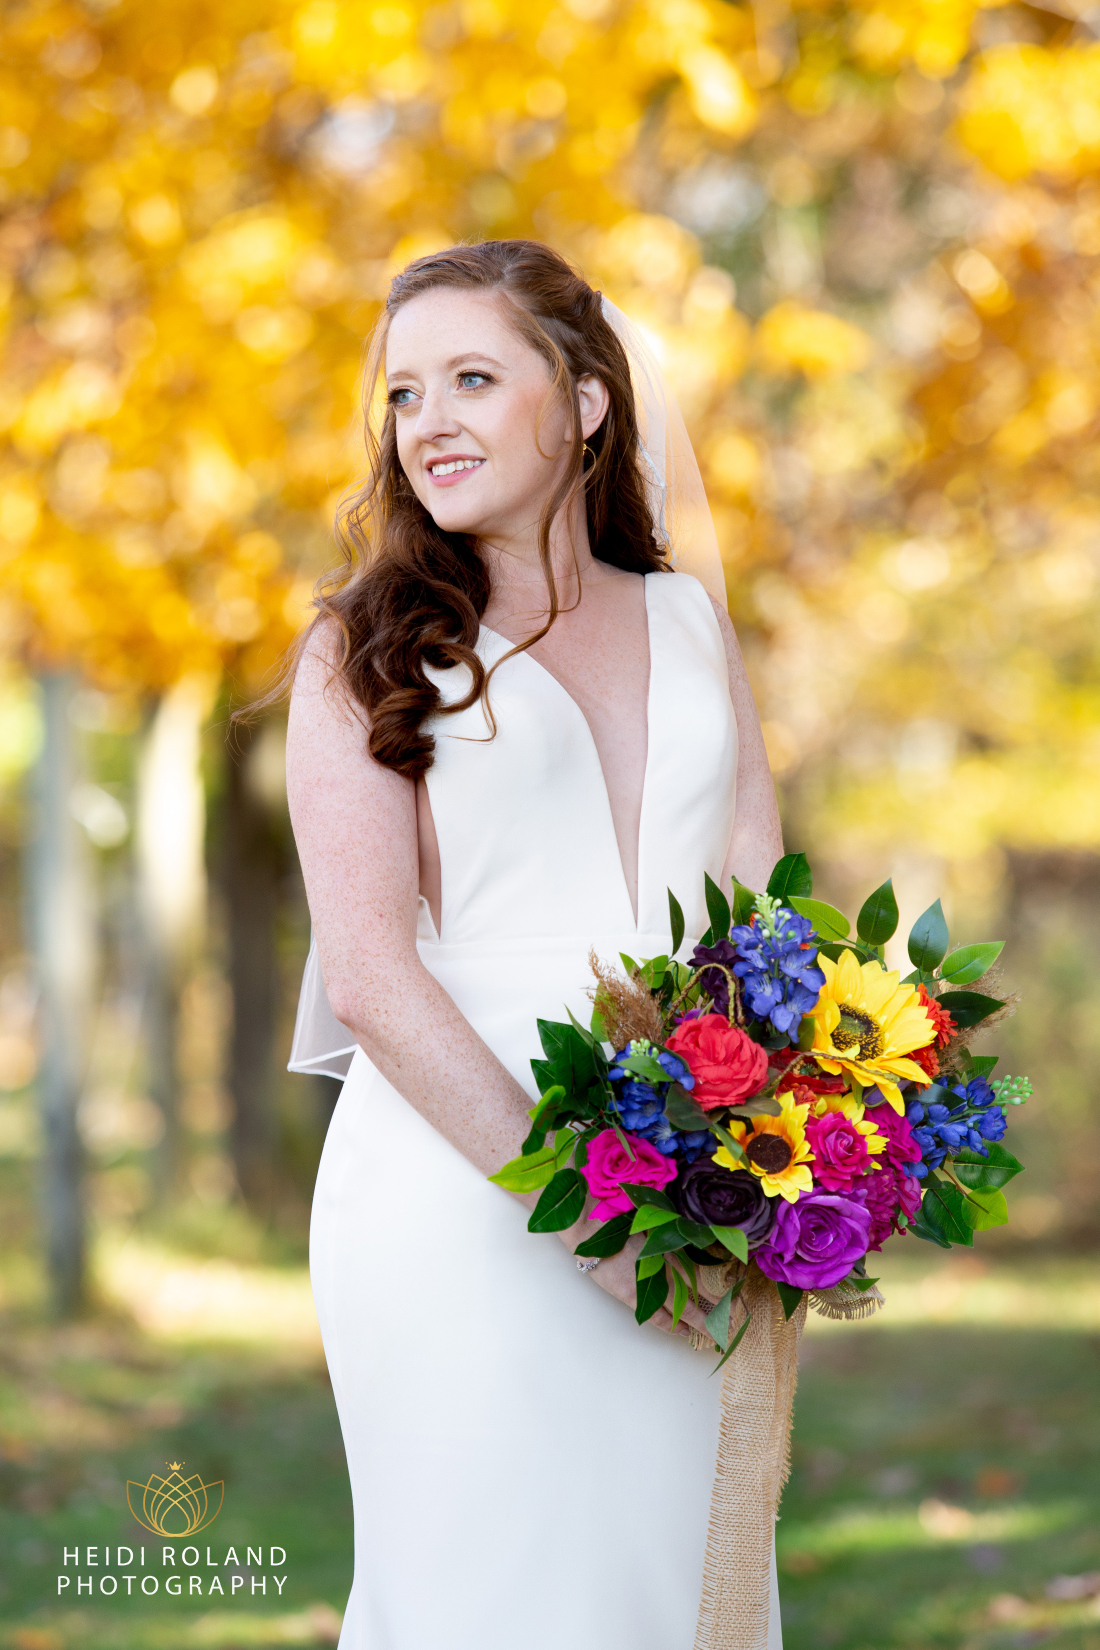 Portrait of bride at fall wedding holding a bright color flower bouquet in PA 